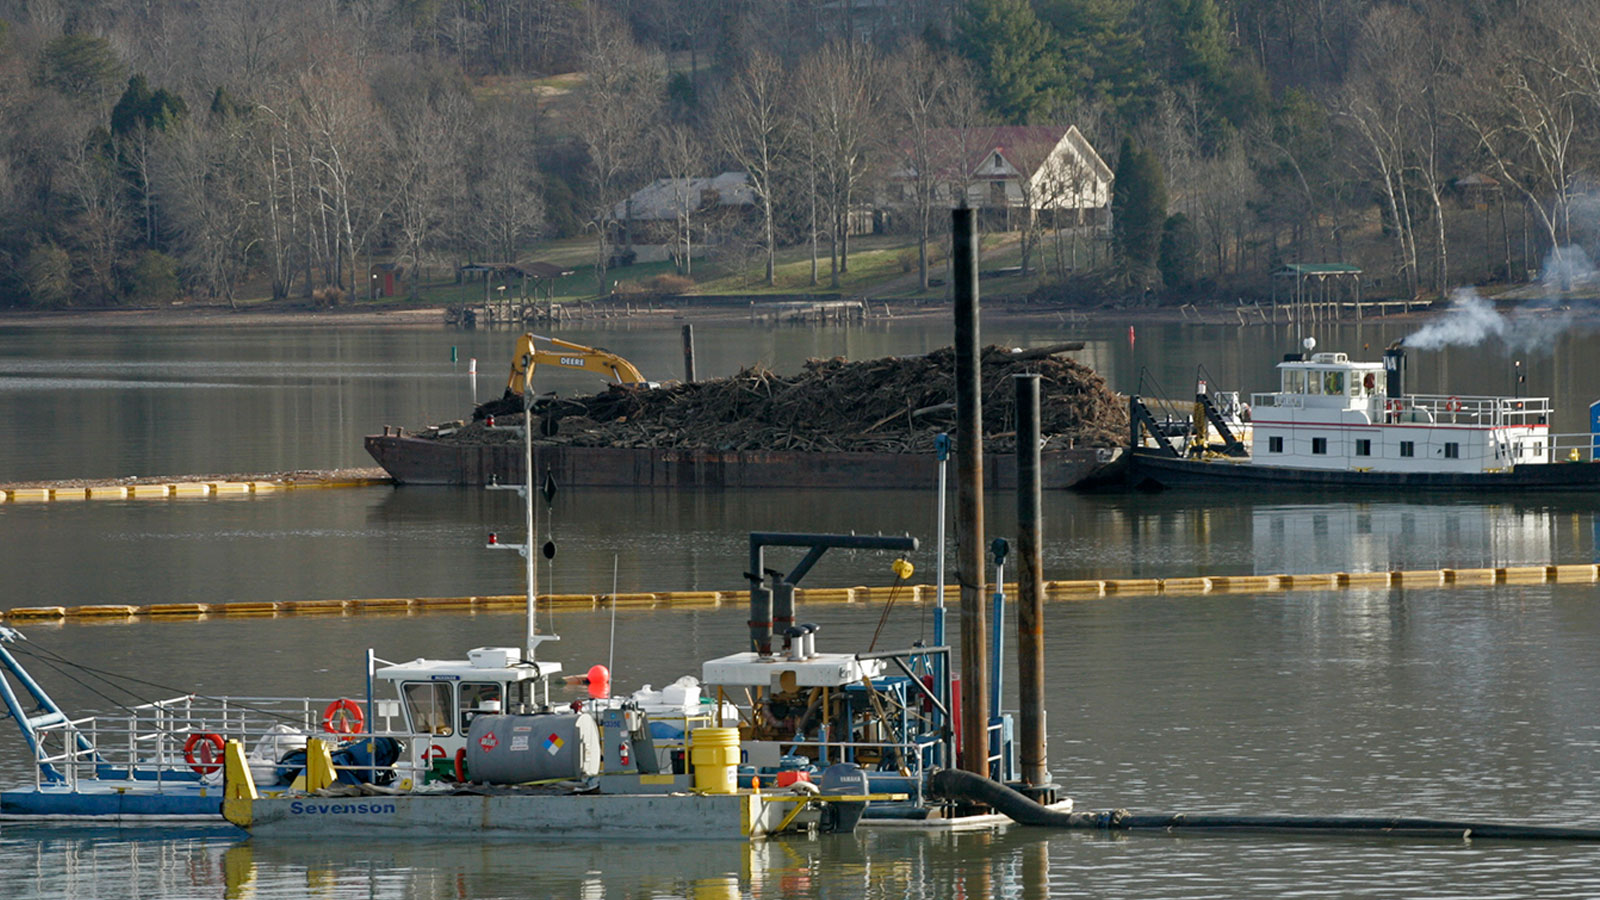 A dredging machine removes sediment and fly ash from the Emory River as a tug boat pushes a barge of debris near the TVA Kingston Fossil Plant in Kingston, Tennessee